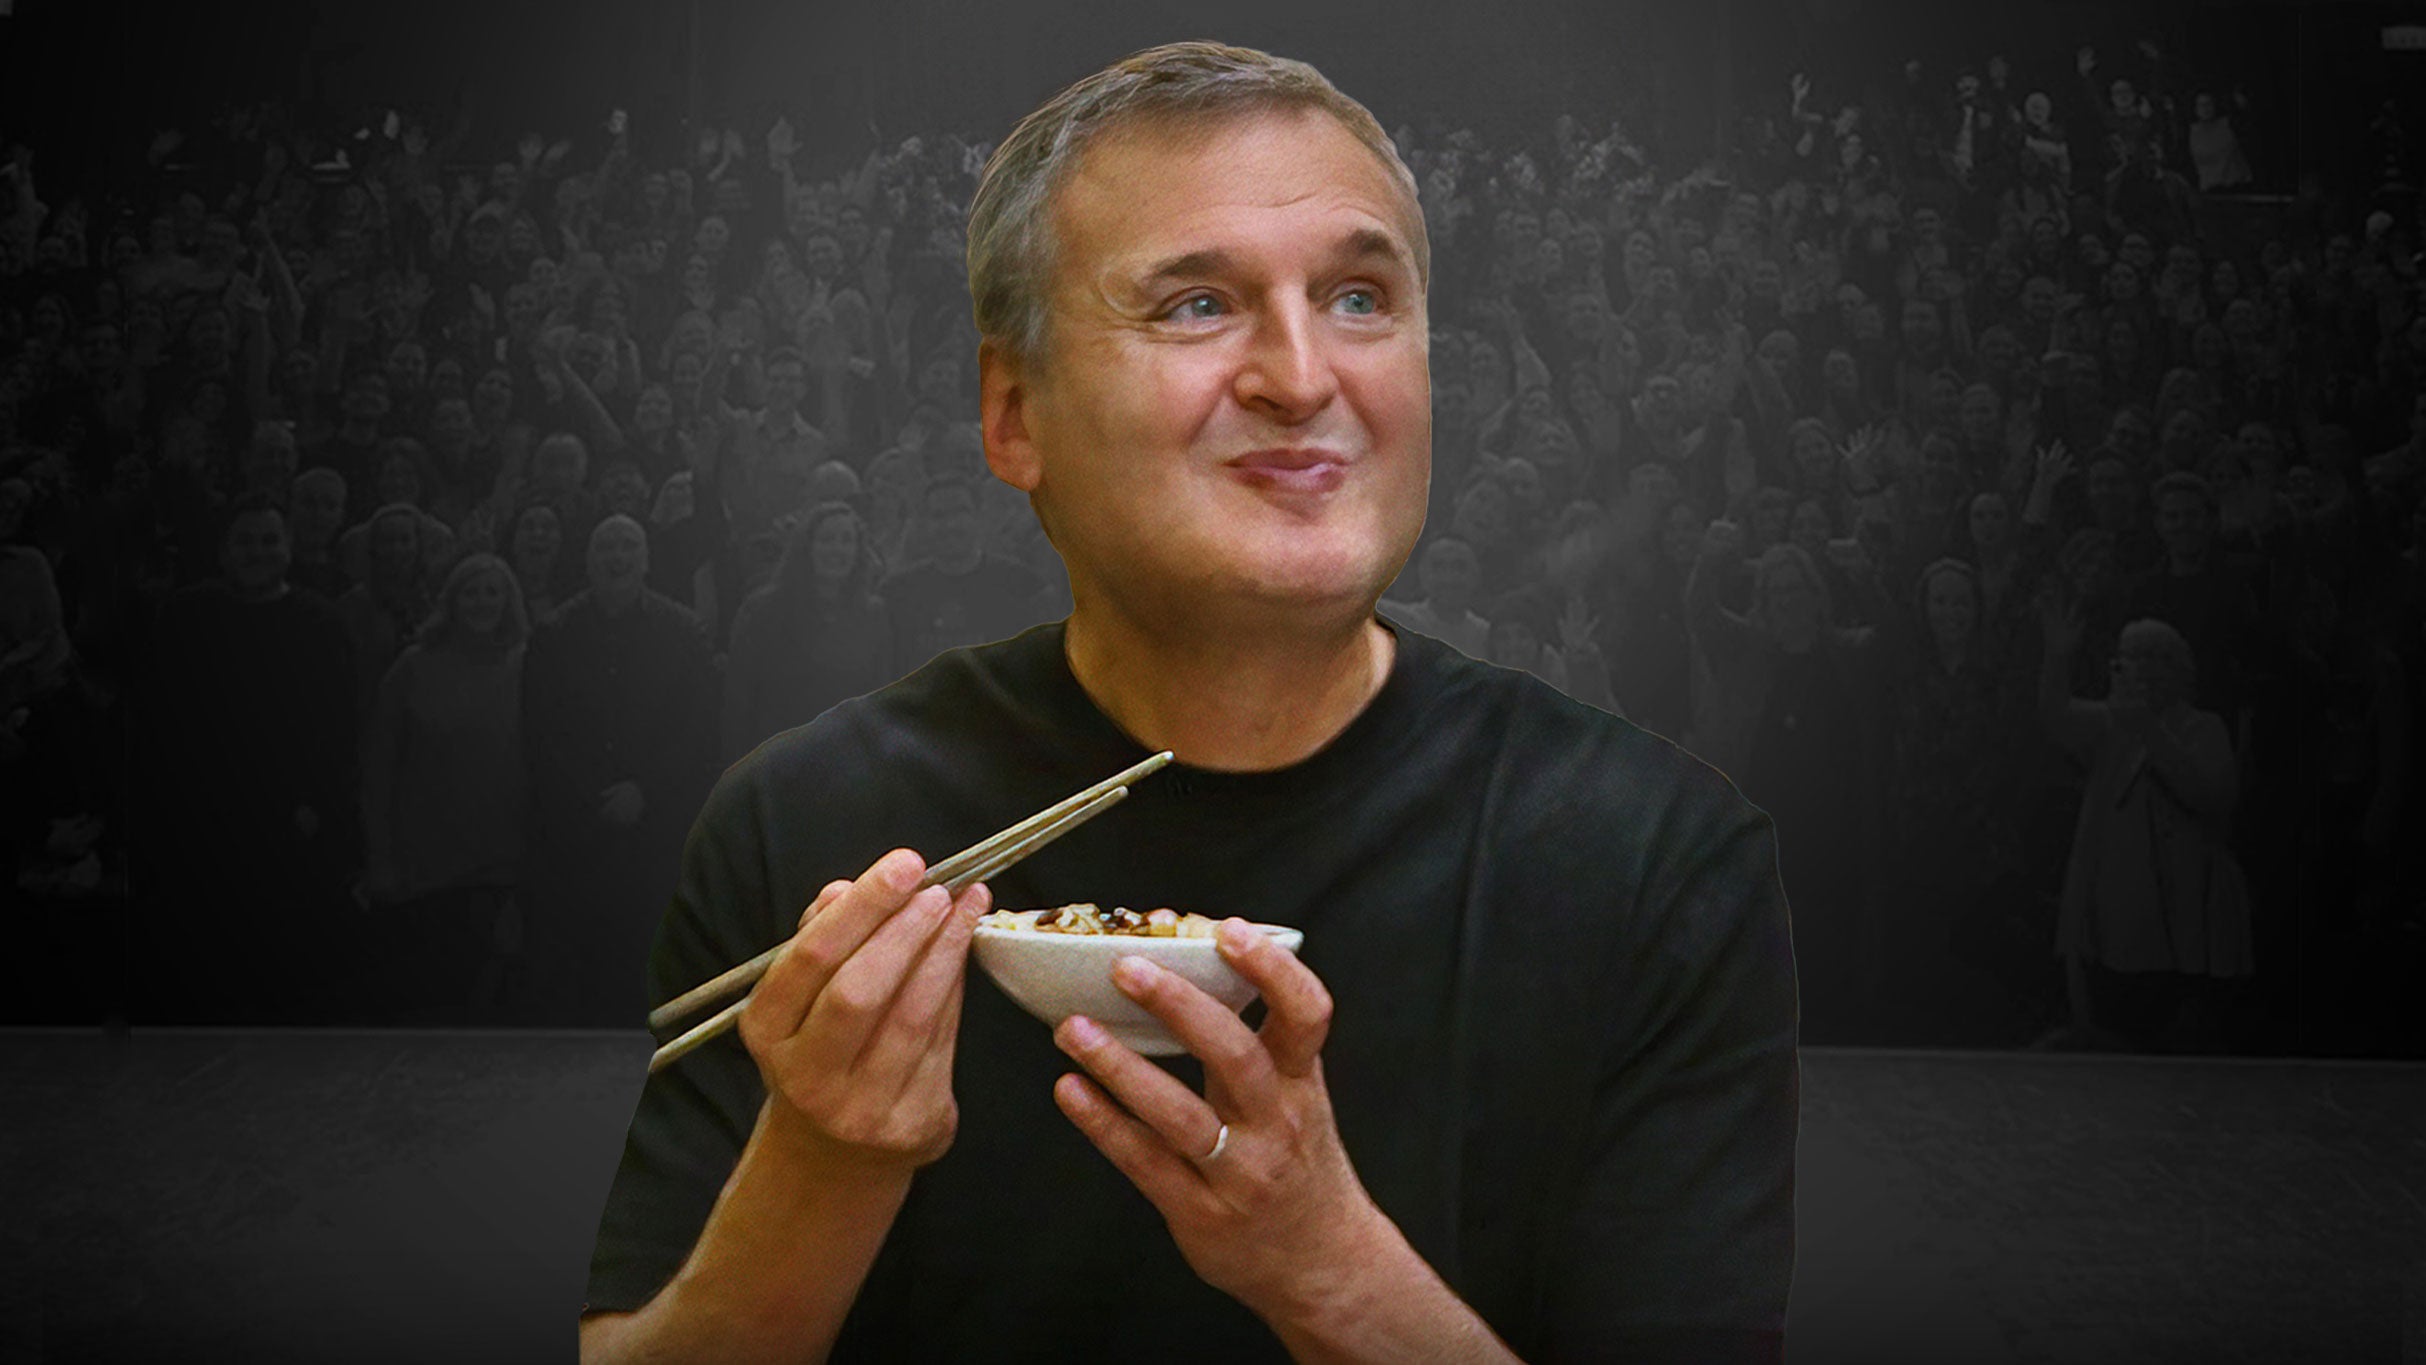 An Evening With Phil Rosenthal Of "Somebody Feed Phil" presale passwords